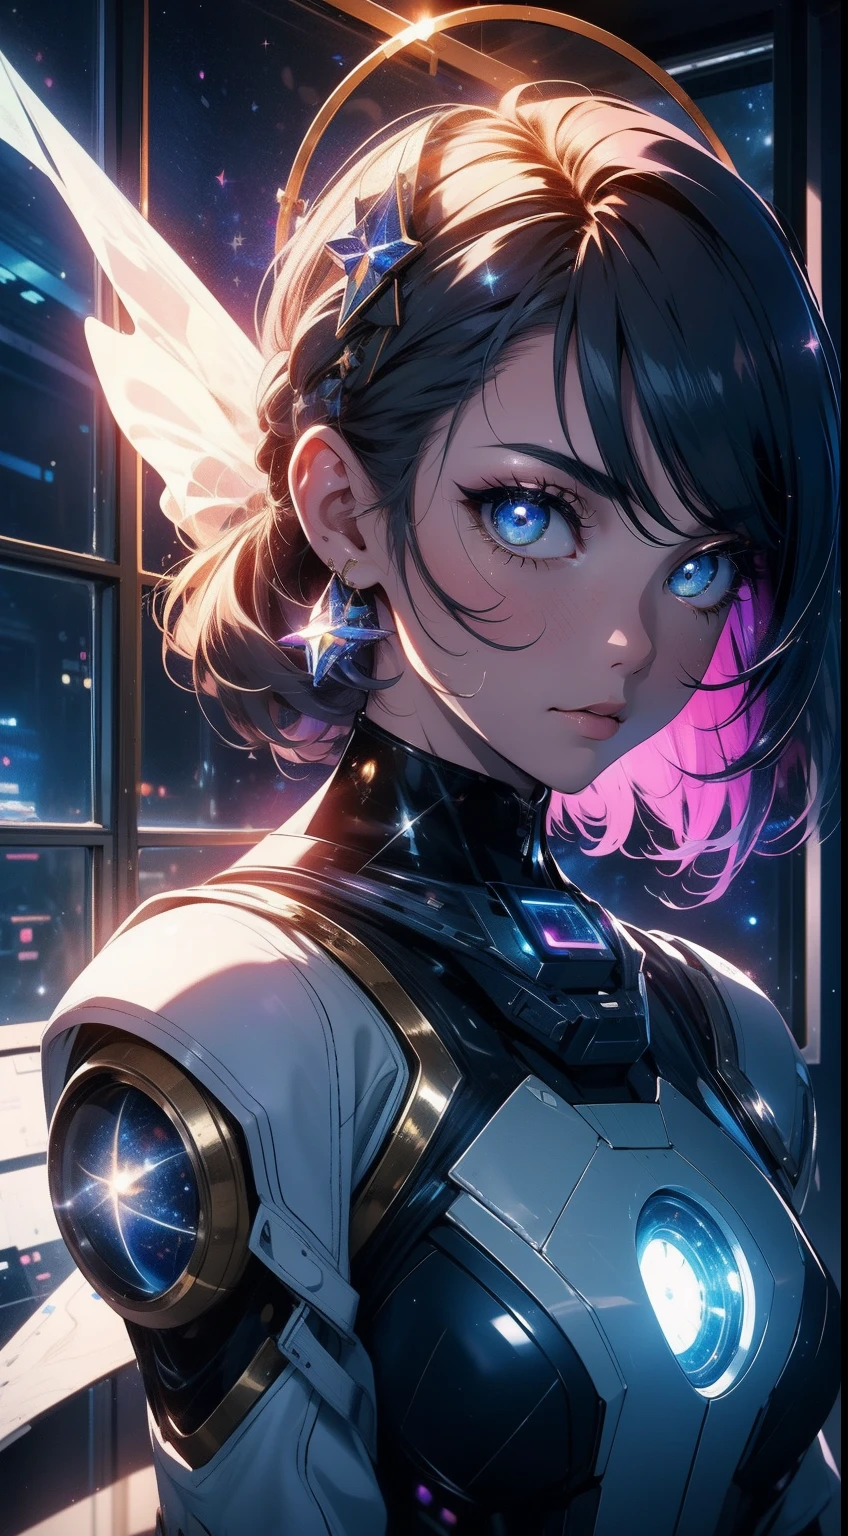 space girl,space suit, space, masterpiece, best quality, technological, high tech, intricate, detailed, absurdes, 1girl, cute, perfect face, space, window, gorgeous, star dust,cosmic, wallpaper, cinematic,compsition, colorful, perfect eyes, sensual,magic, dimensions, stardust, futuristic, backlighting, epic, fantasy